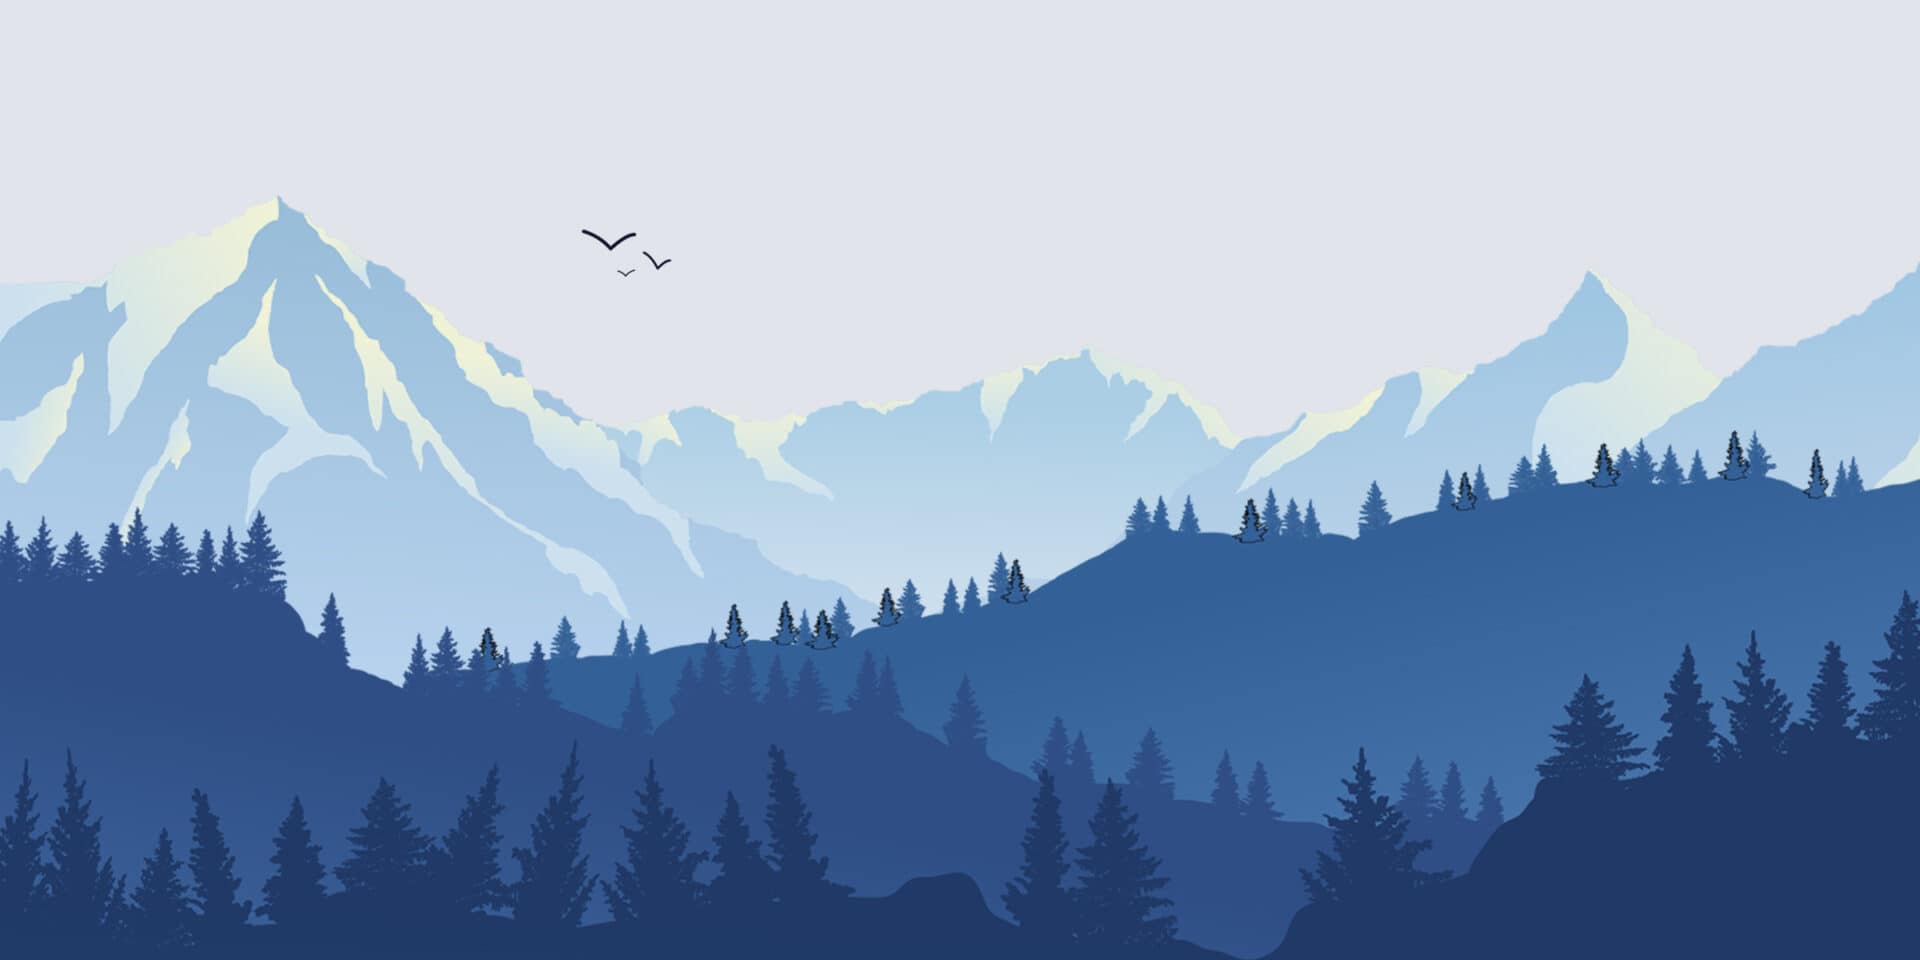 illustration of mountains in shades of blue